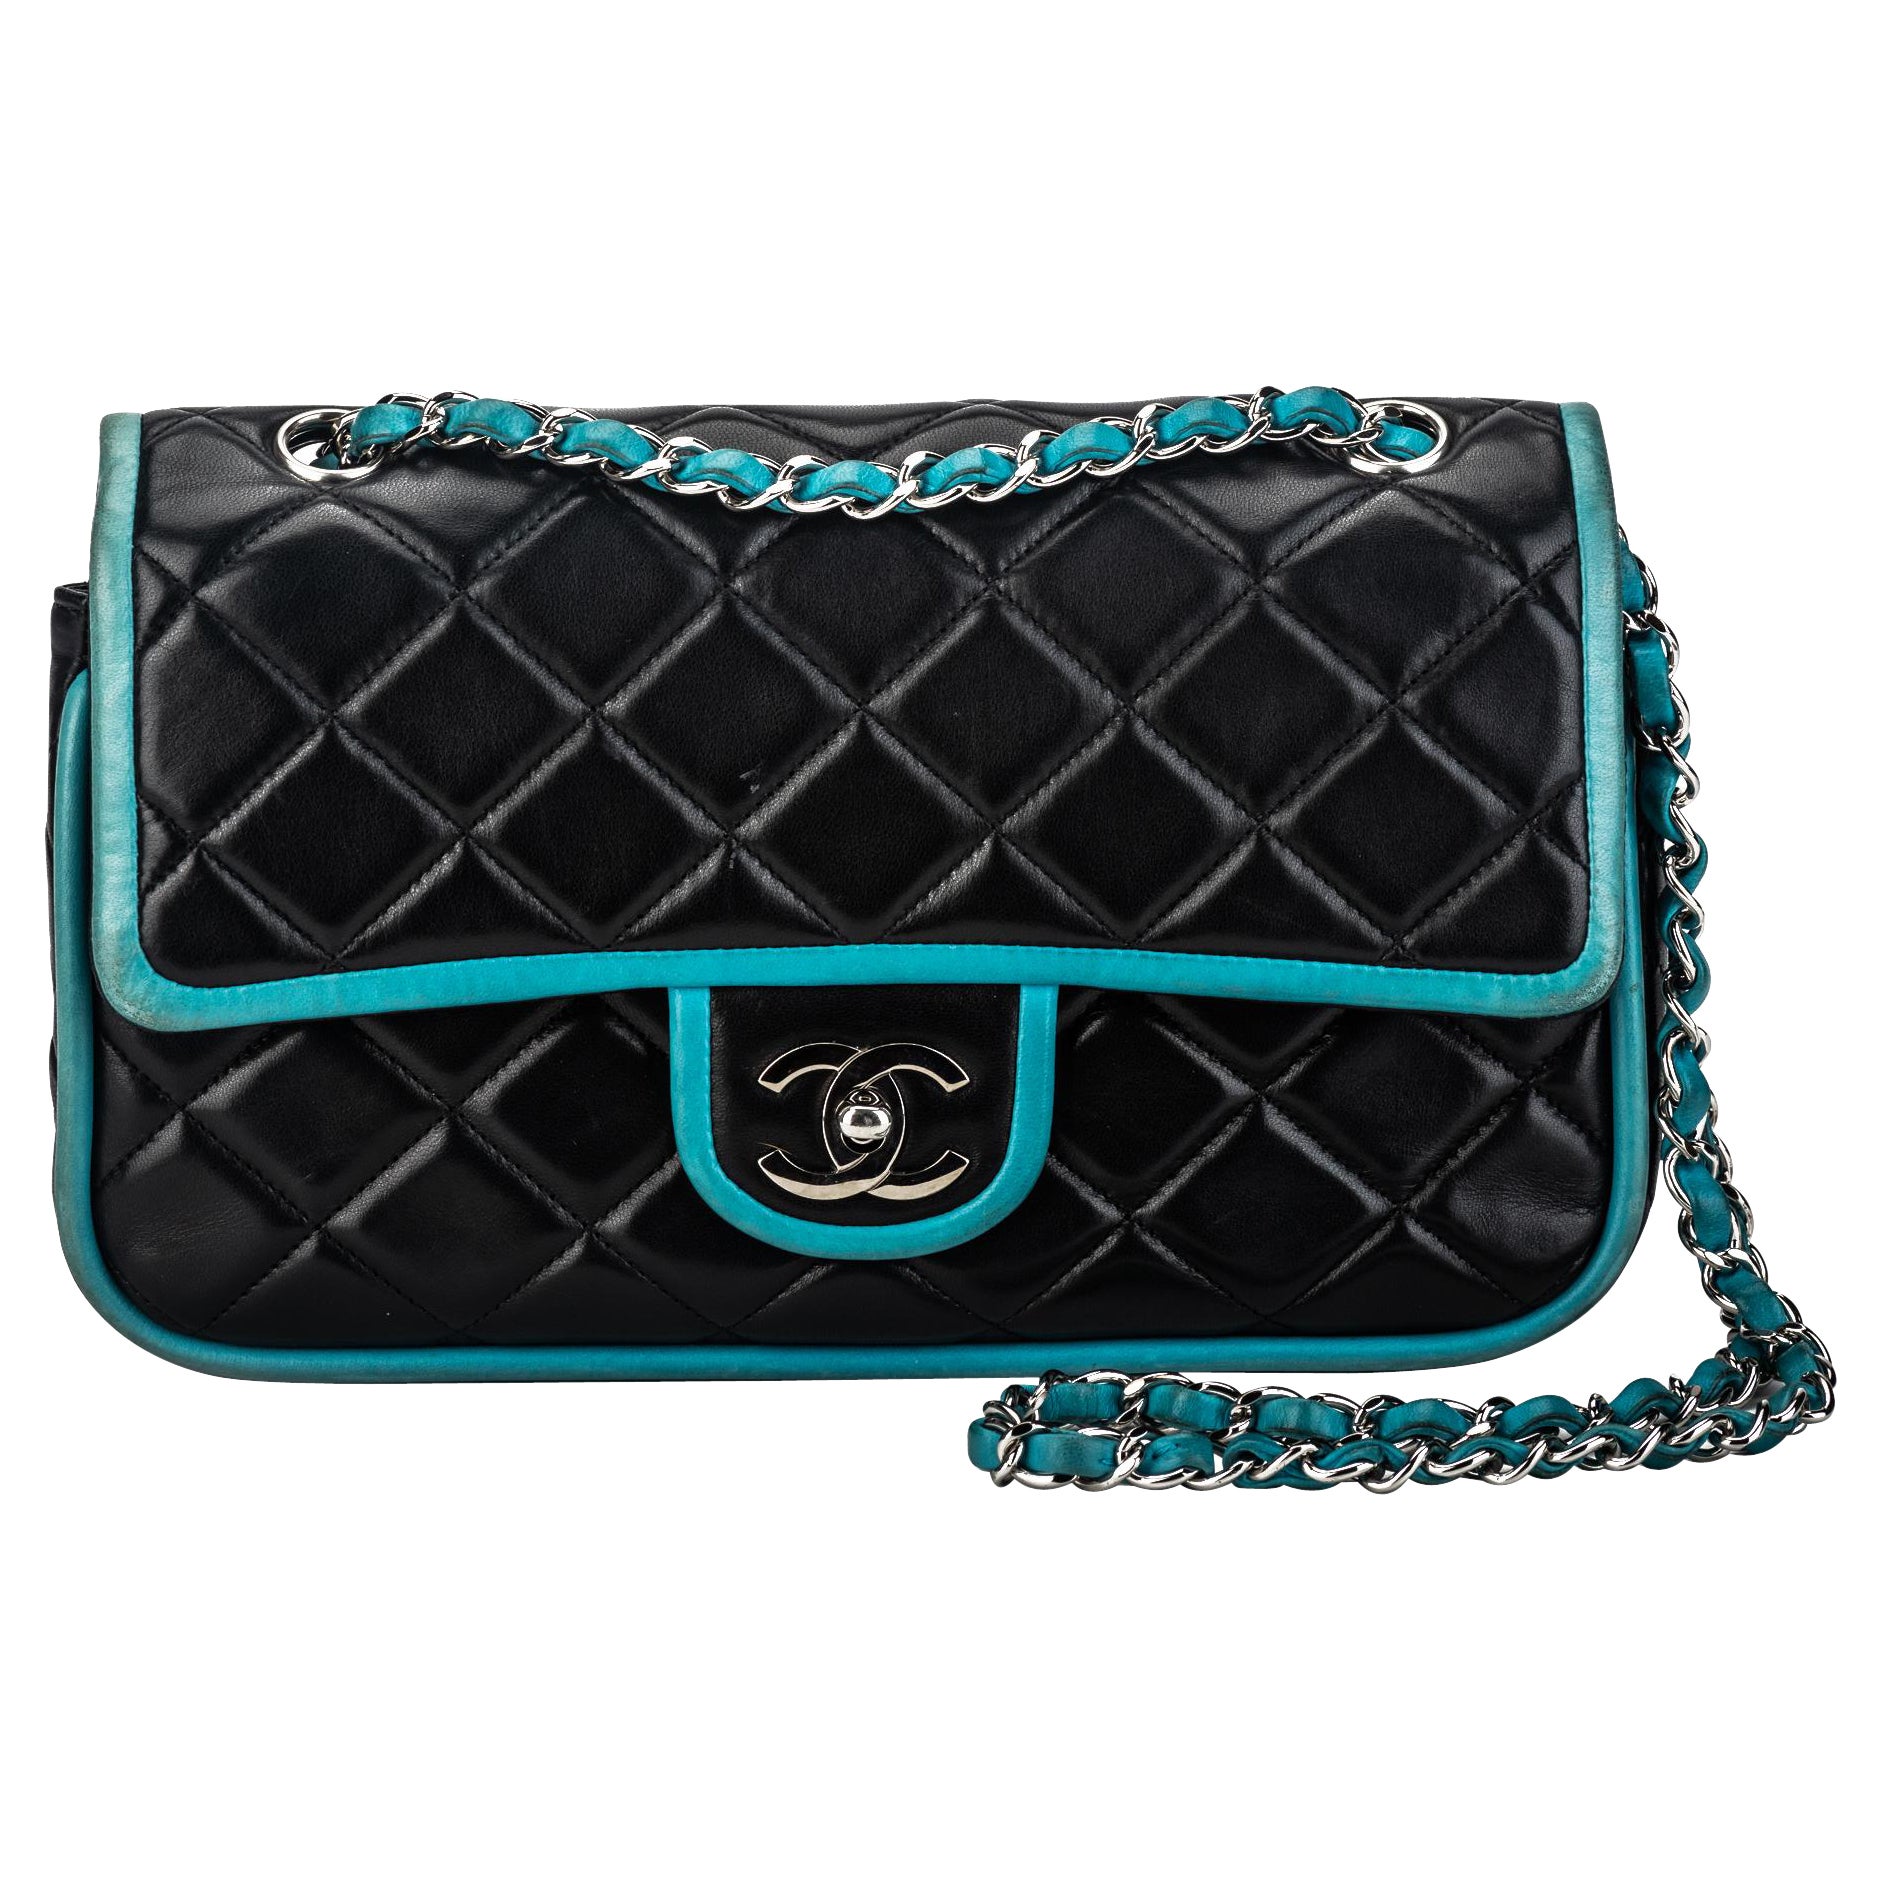 Turquoise Chanel Bag - 11 For Sale on 1stDibs  chanel classic flap bag  turquoise, turquoise designer bag, chanel turquoise flap bag